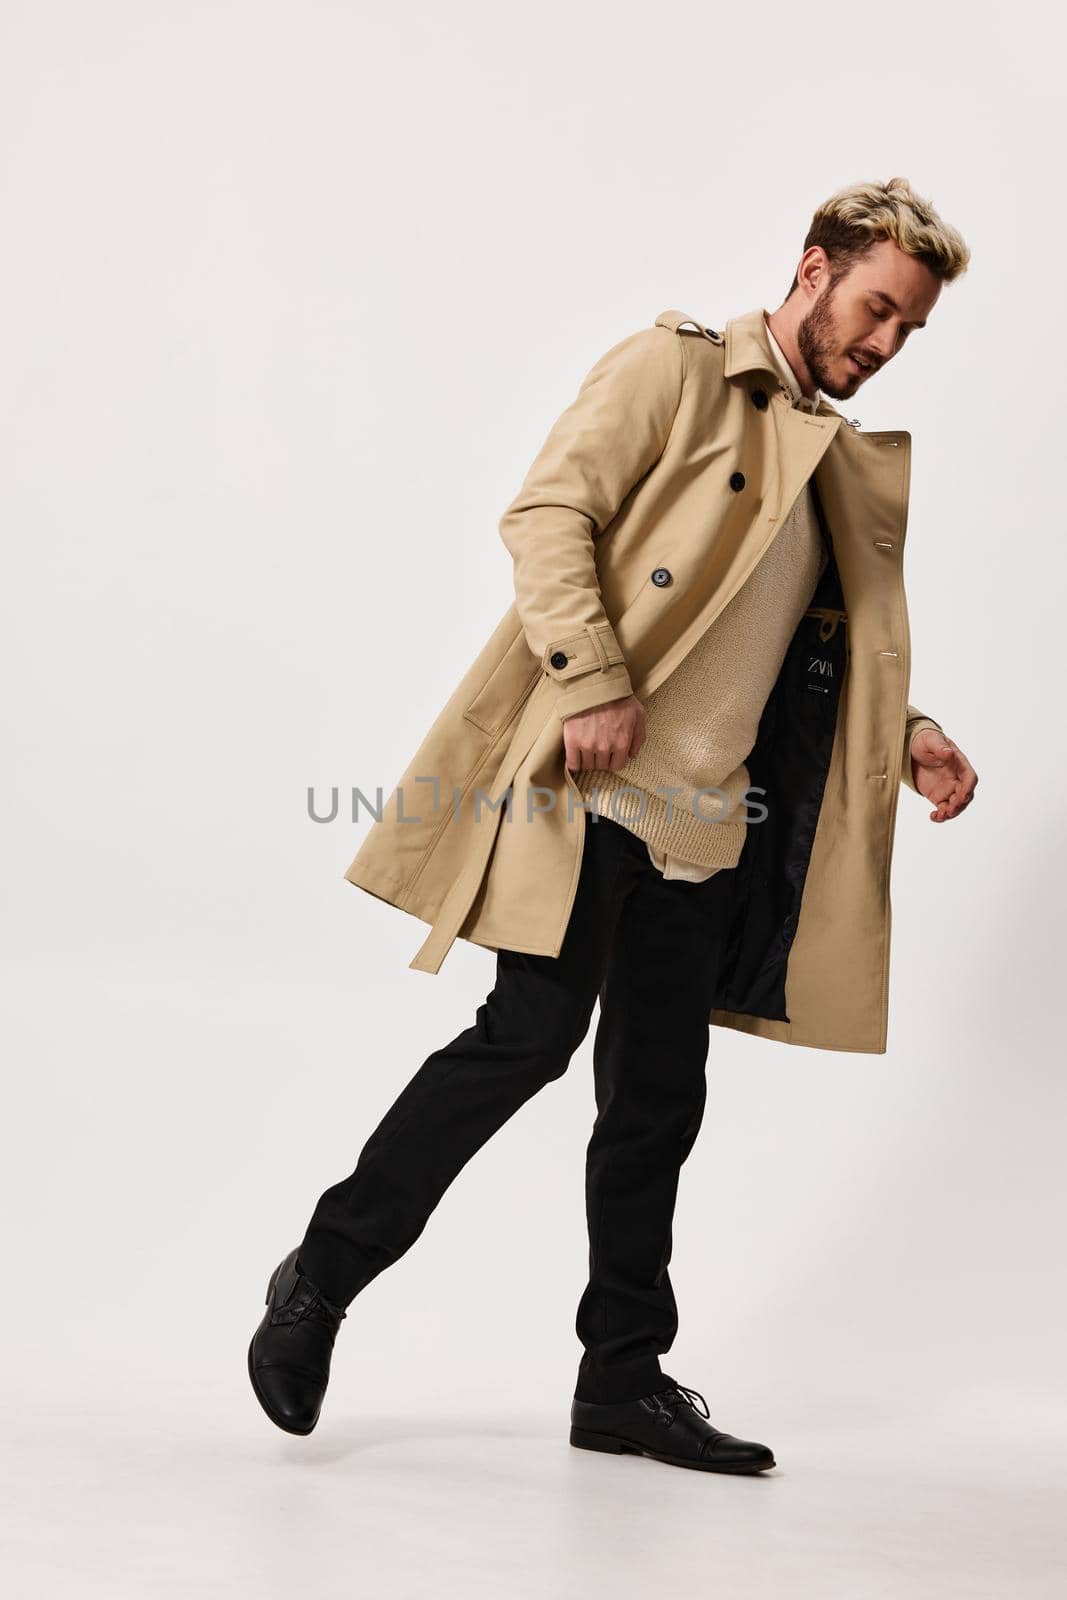 a man in a beige coat, trousers and a sweater bent over to the side on a light background in full growth. High quality photo